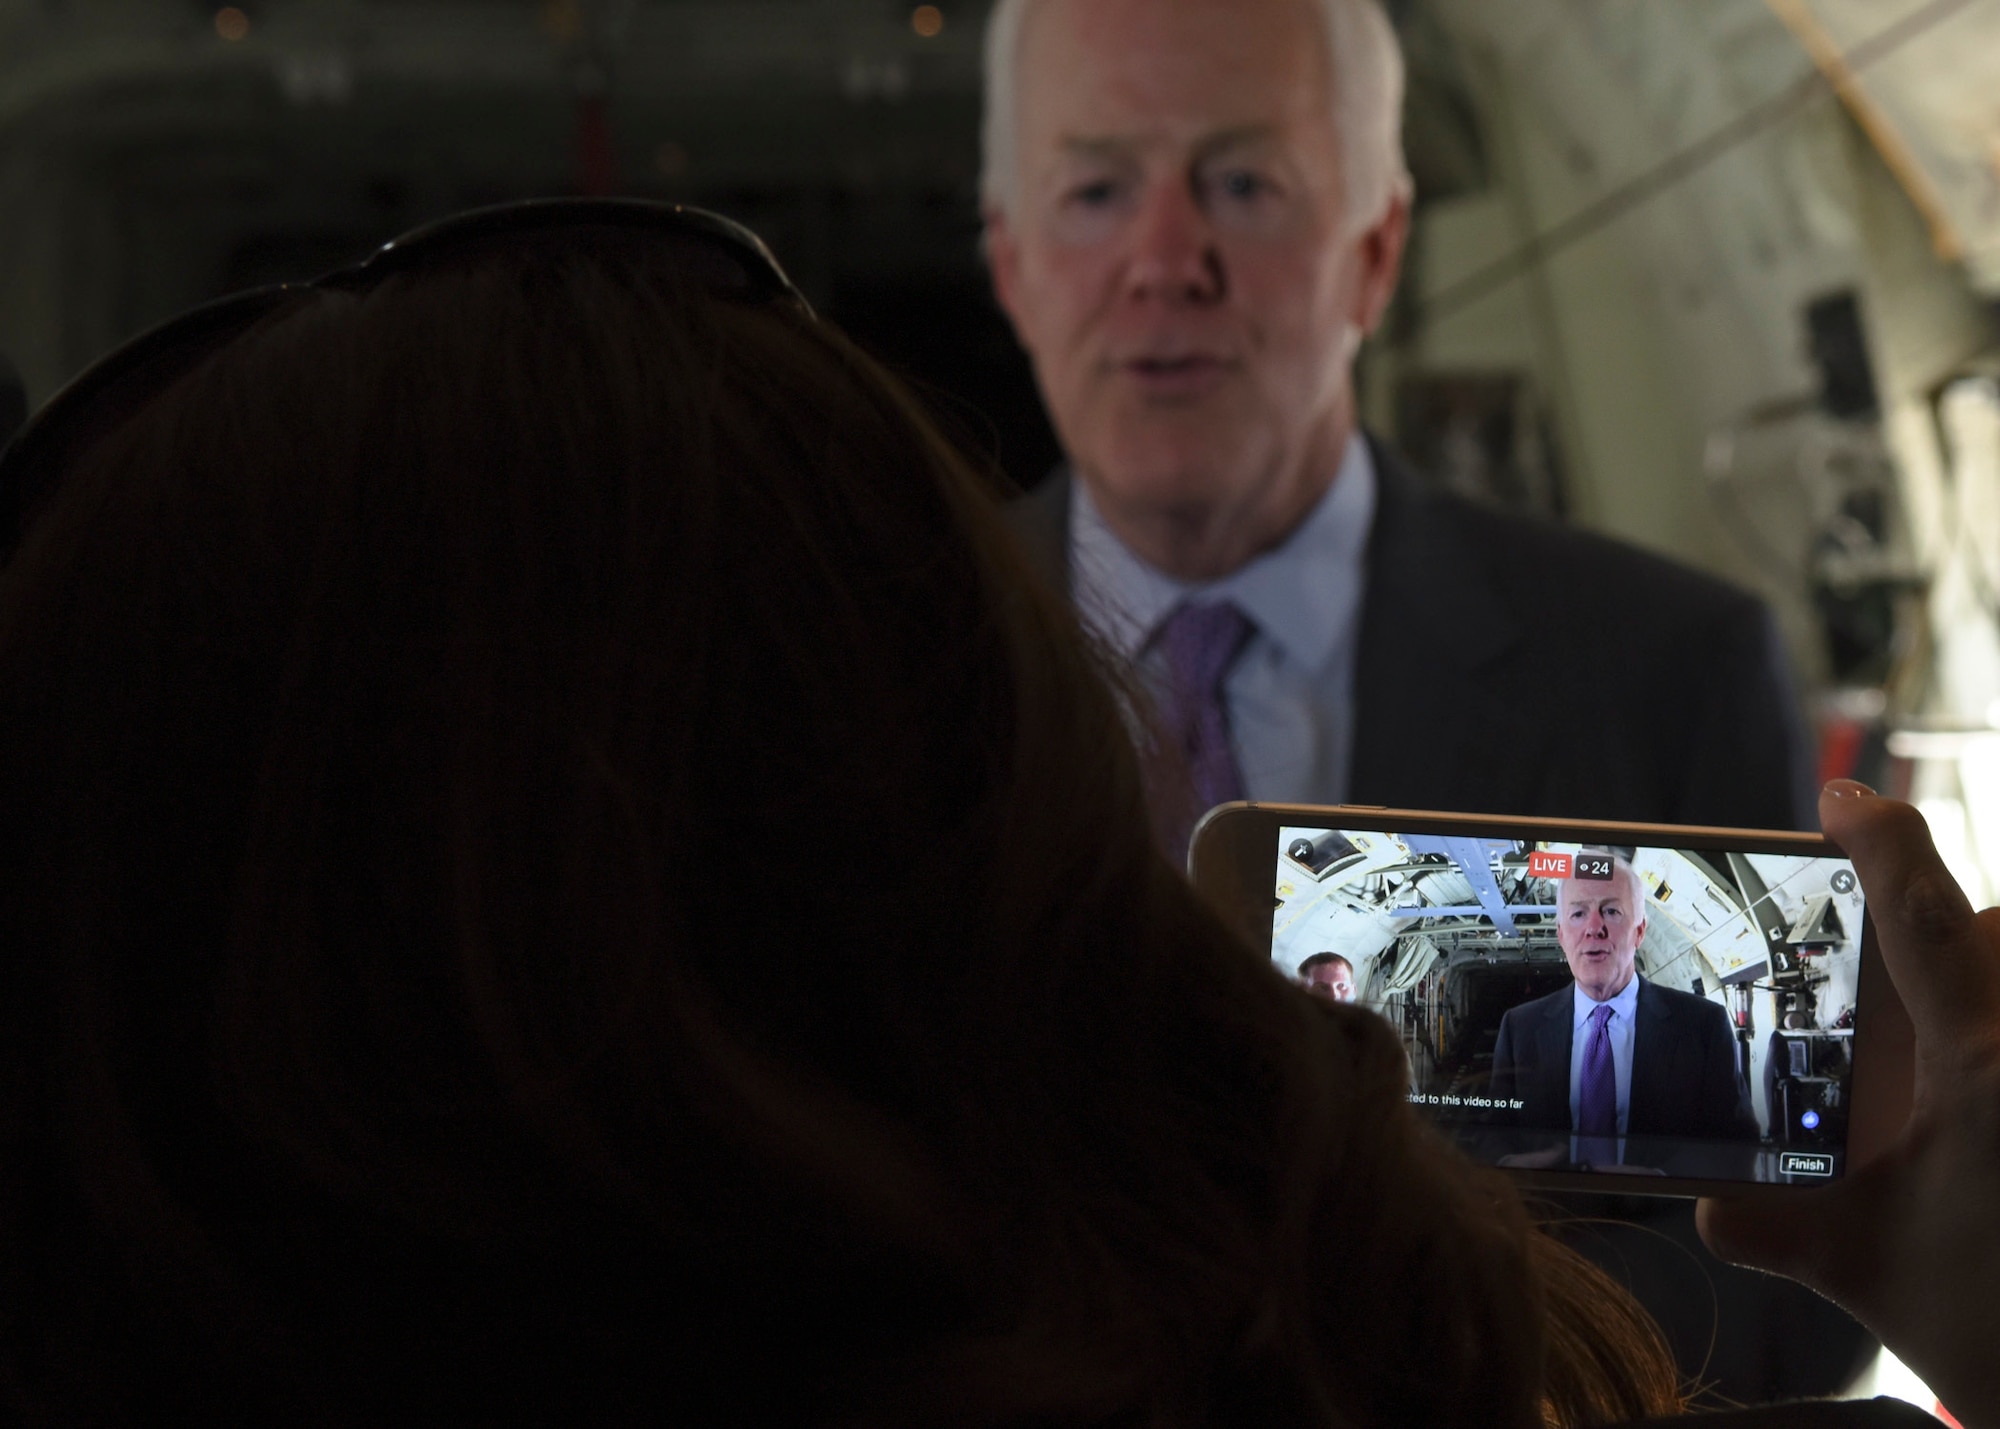 U.S. Sen. John Cornyn, R-TX, speaks during a live interview on board a C-130J Super Hercules at Dyess Air Force Base, April 18, 2017. The senator said the enduring mission of Dyess remains very important for the U.S. in regards to the military and national security. (U.S. Air Force photo by Senior Airman Kedesha Pennant)
 
